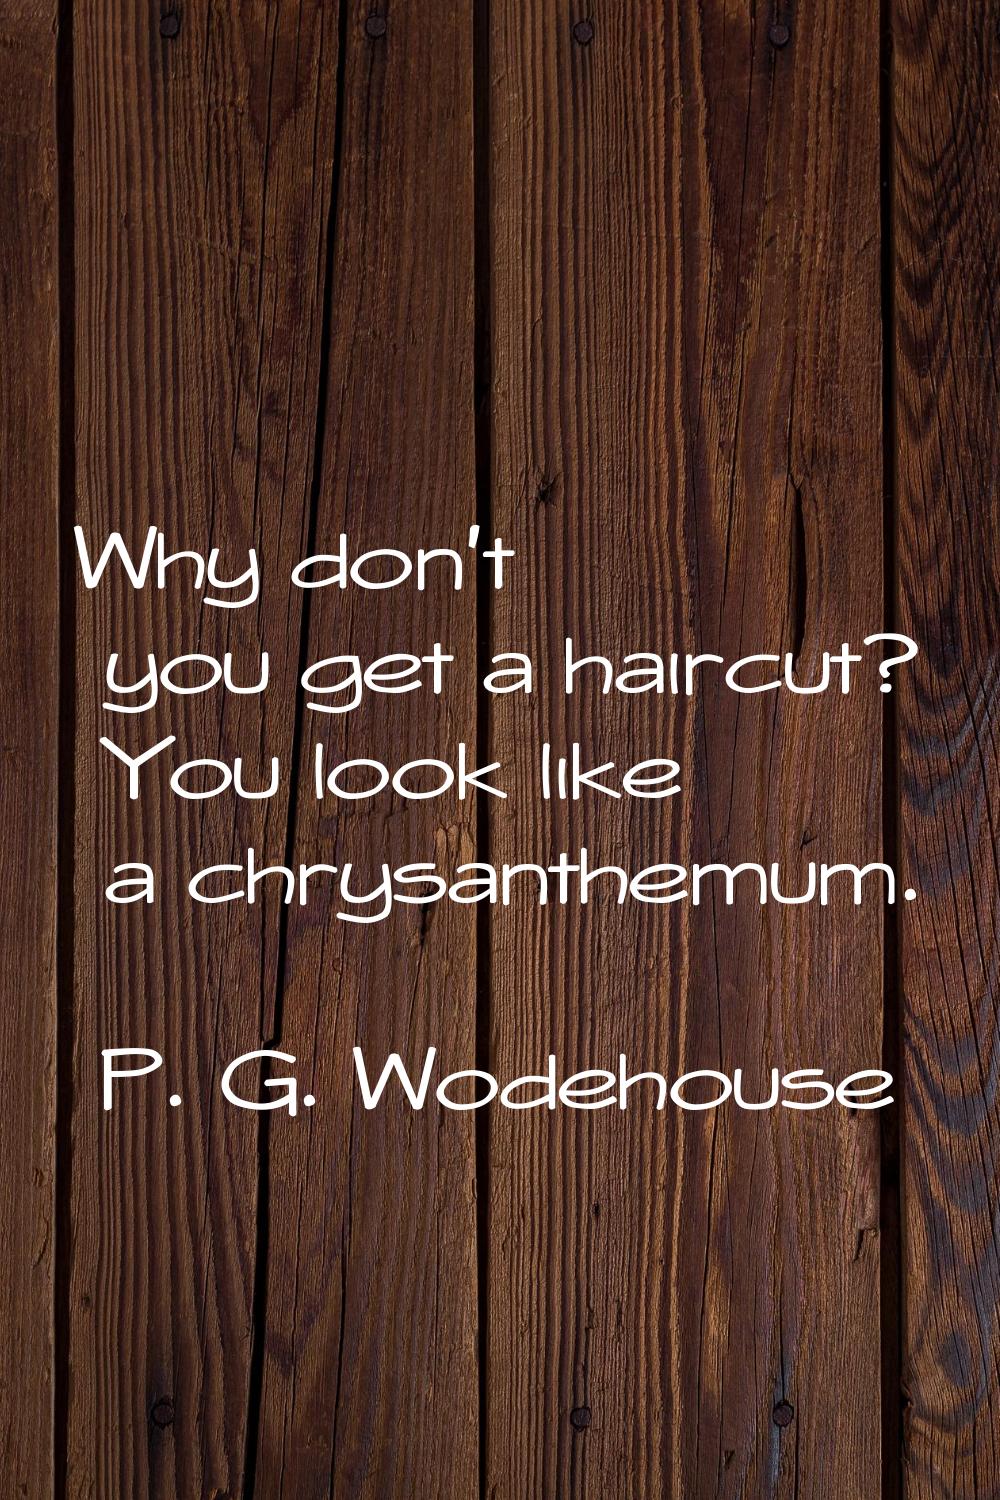 Why don't you get a haircut? You look like a chrysanthemum.